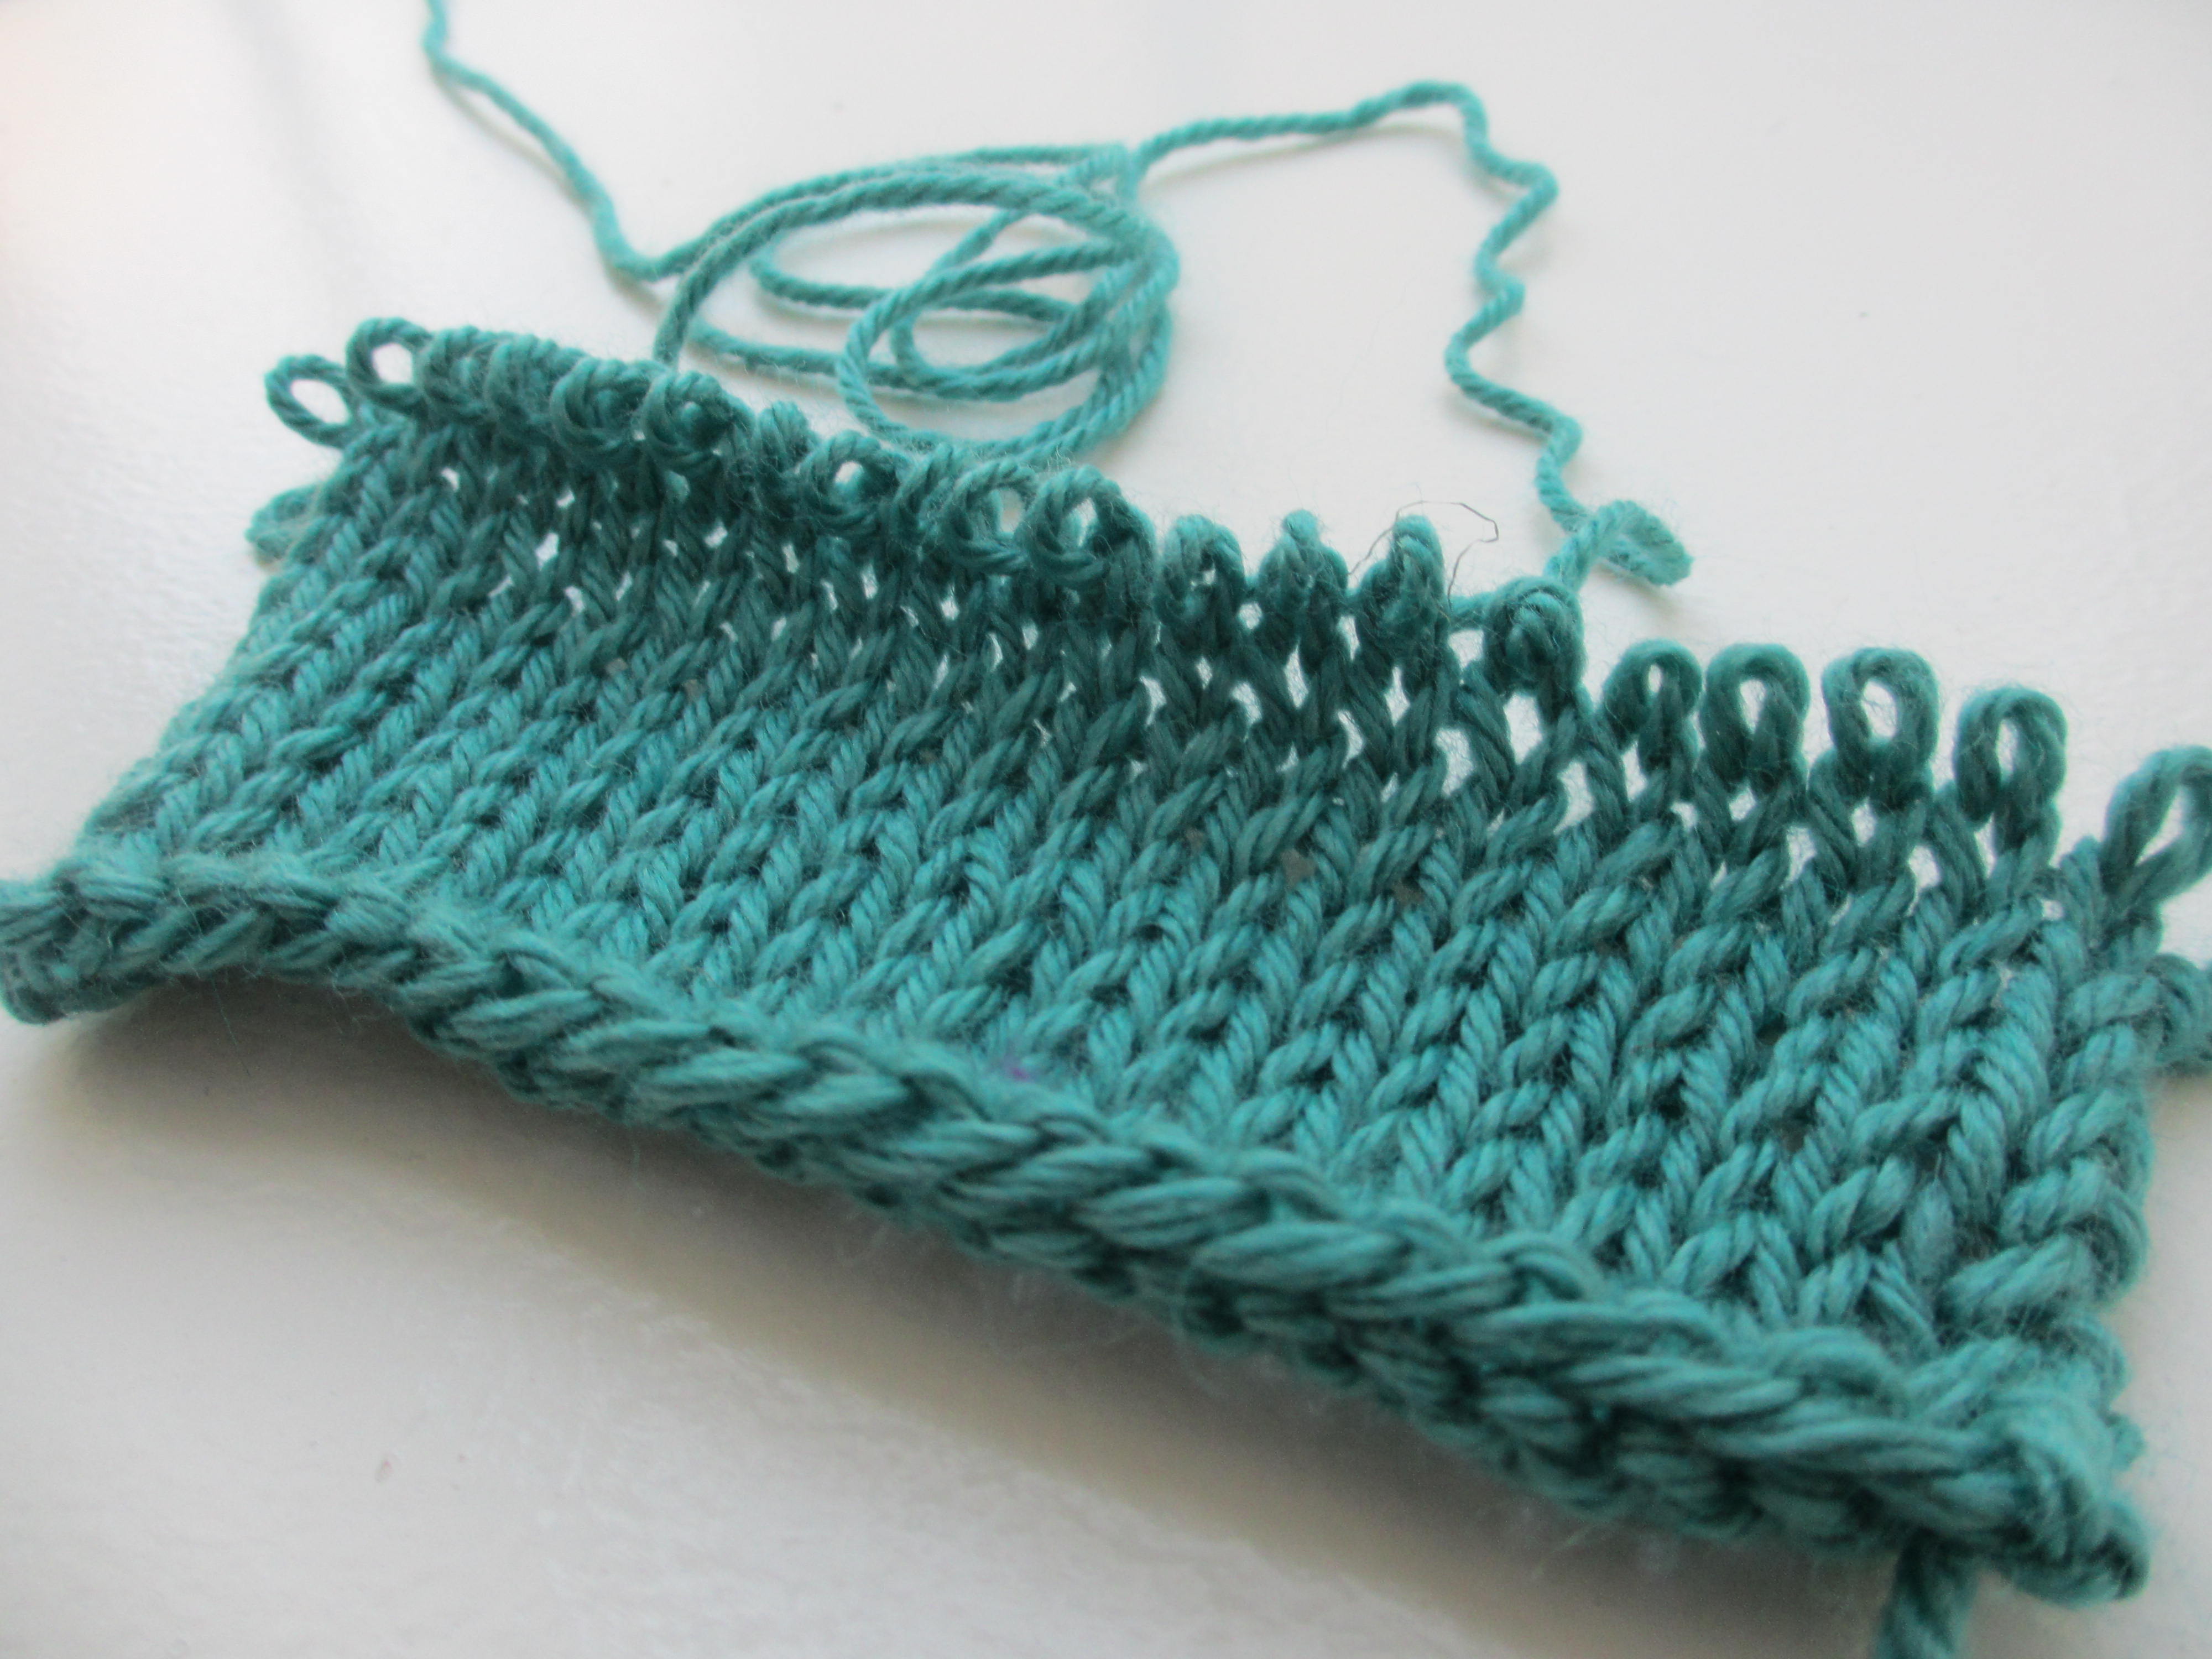 Frogging or ripping knitting stitches